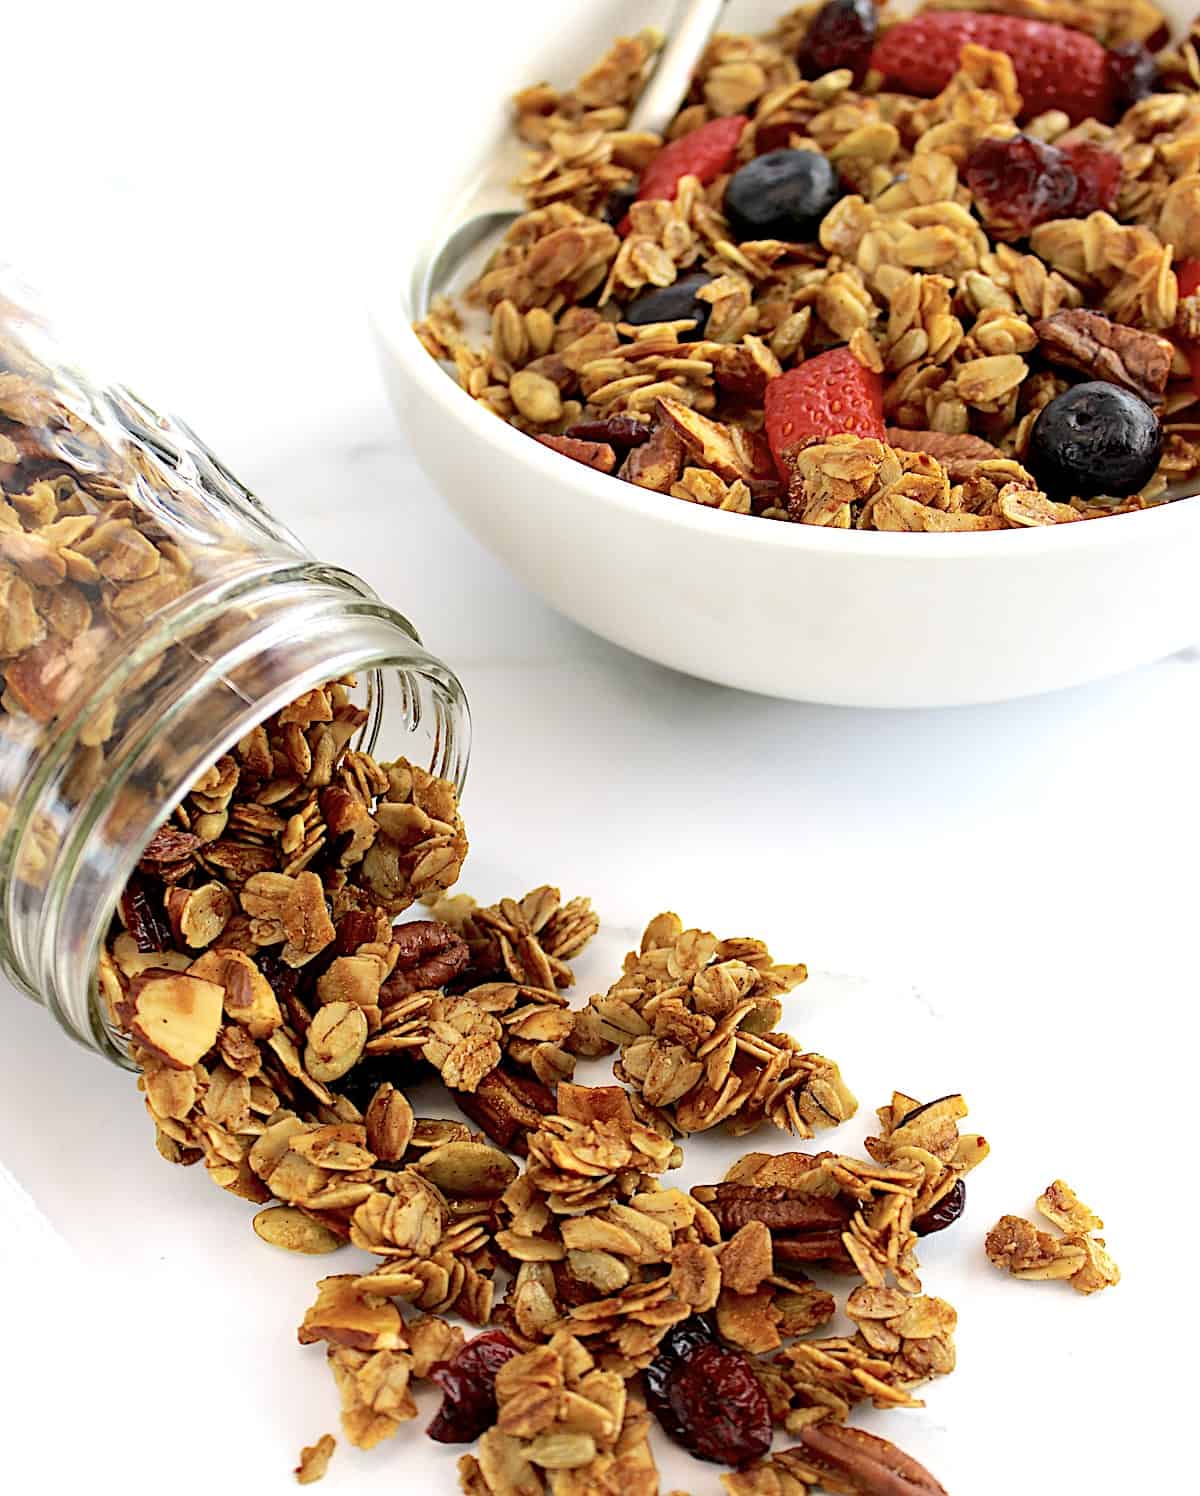 Homemade Granola spilling out of jar with cereal in bowl inn background